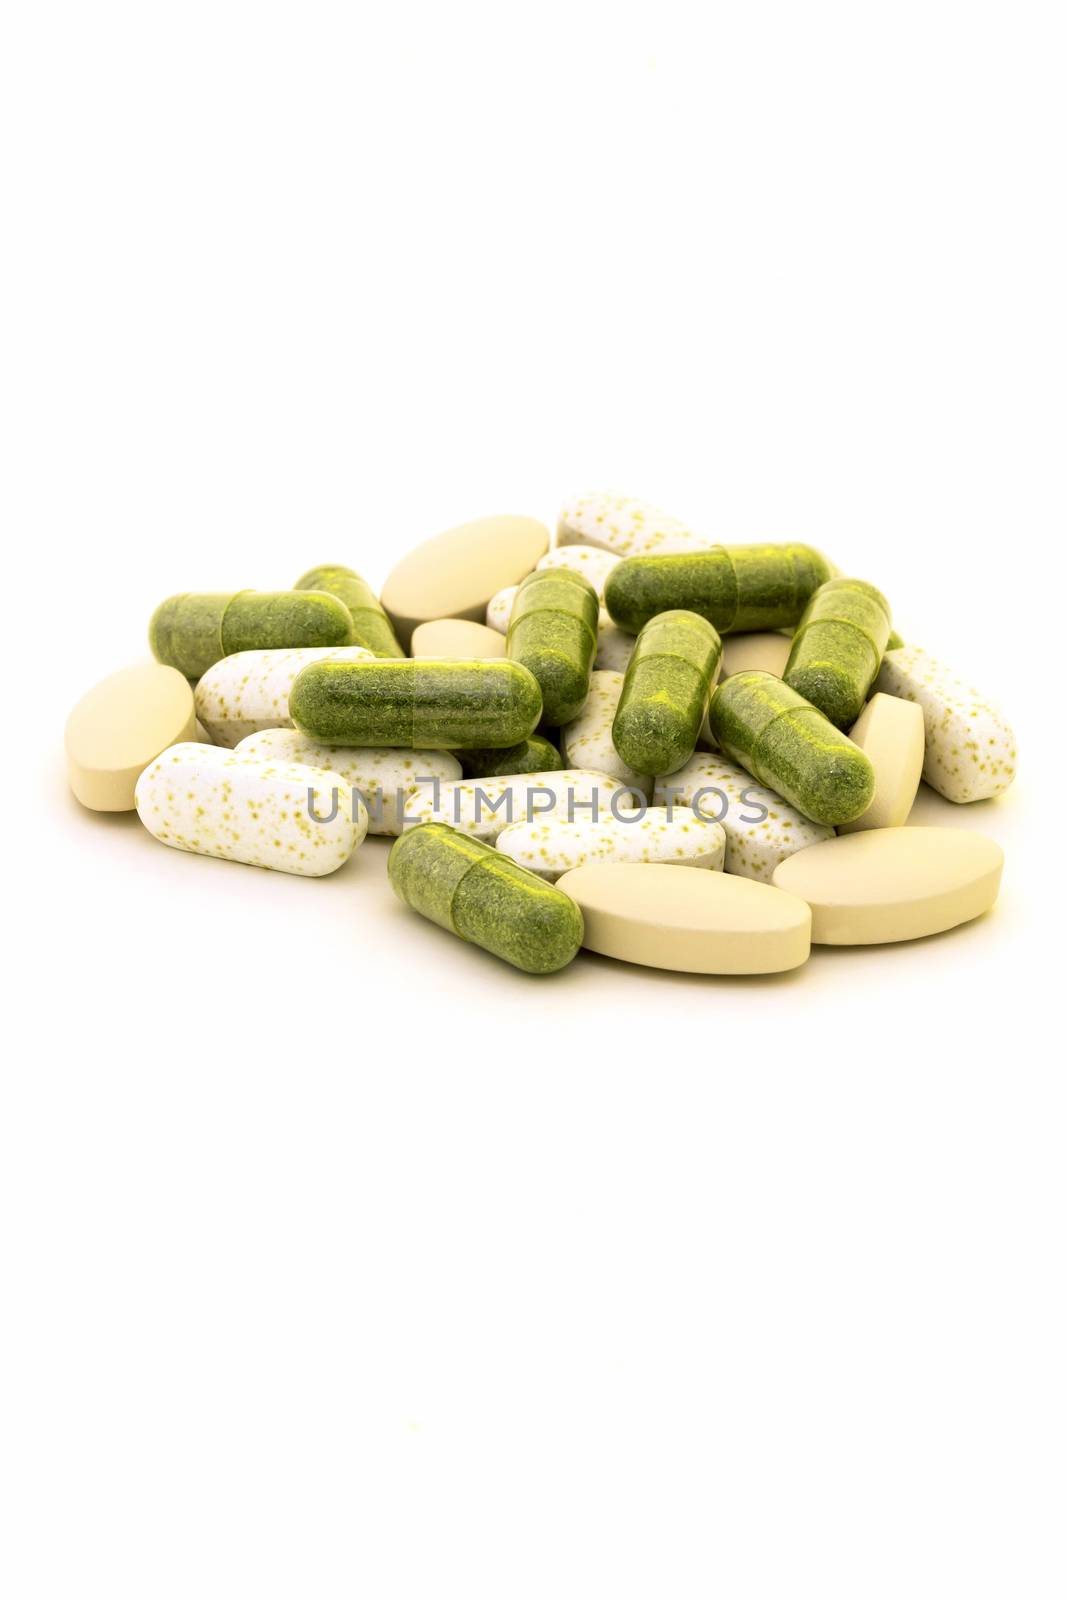 Green chlorophyll capsules on white background 